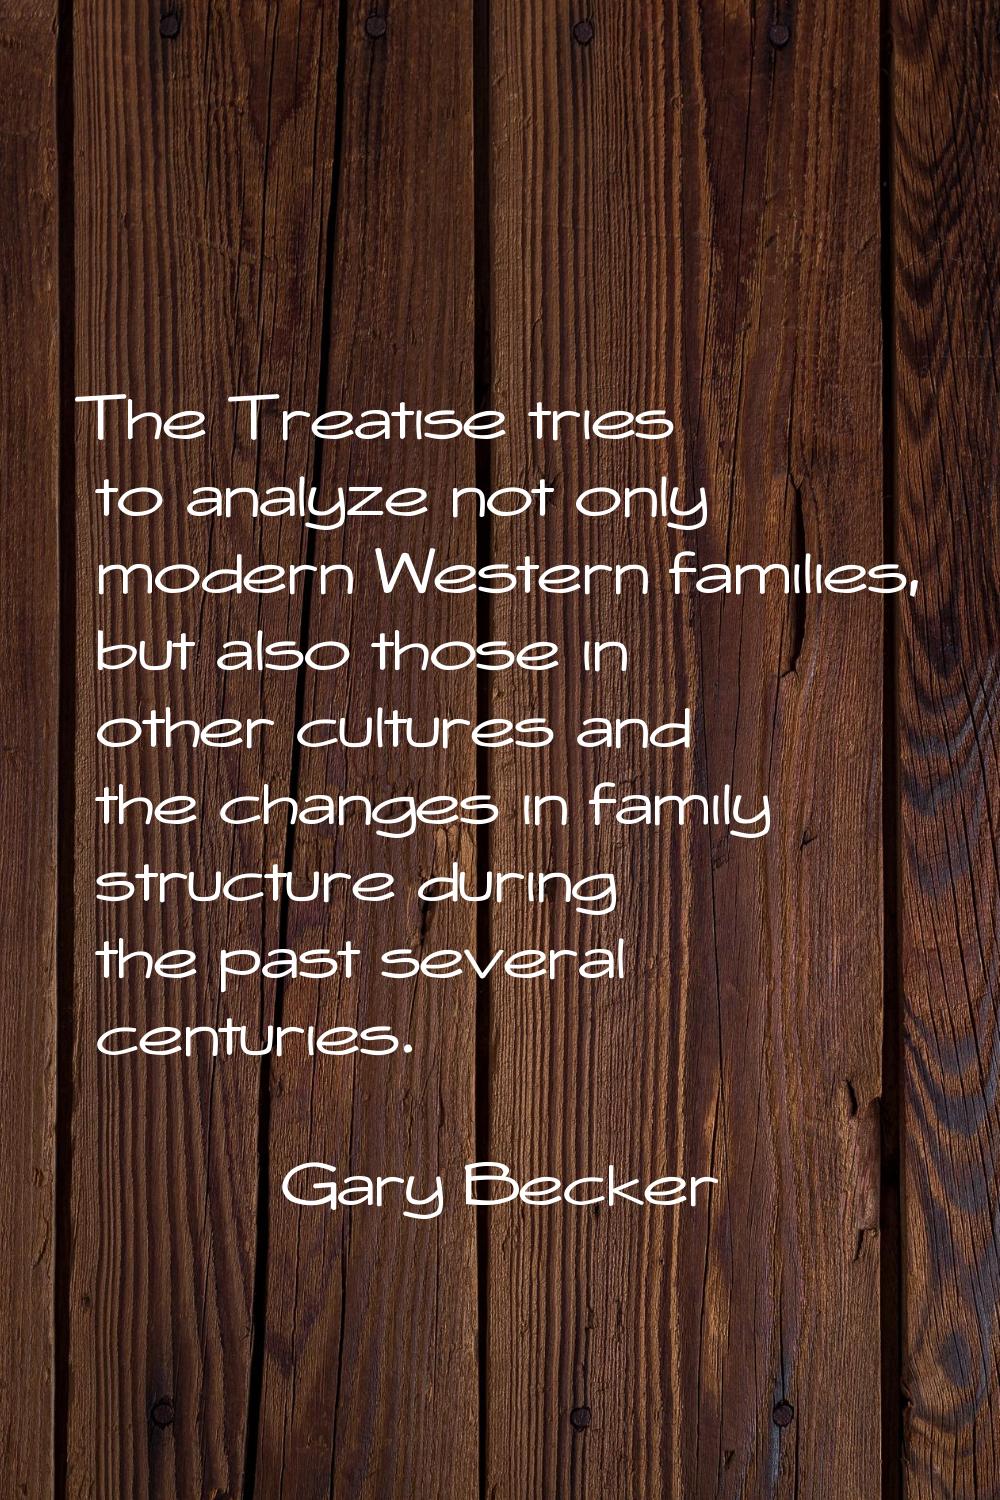 The Treatise tries to analyze not only modern Western families, but also those in other cultures an